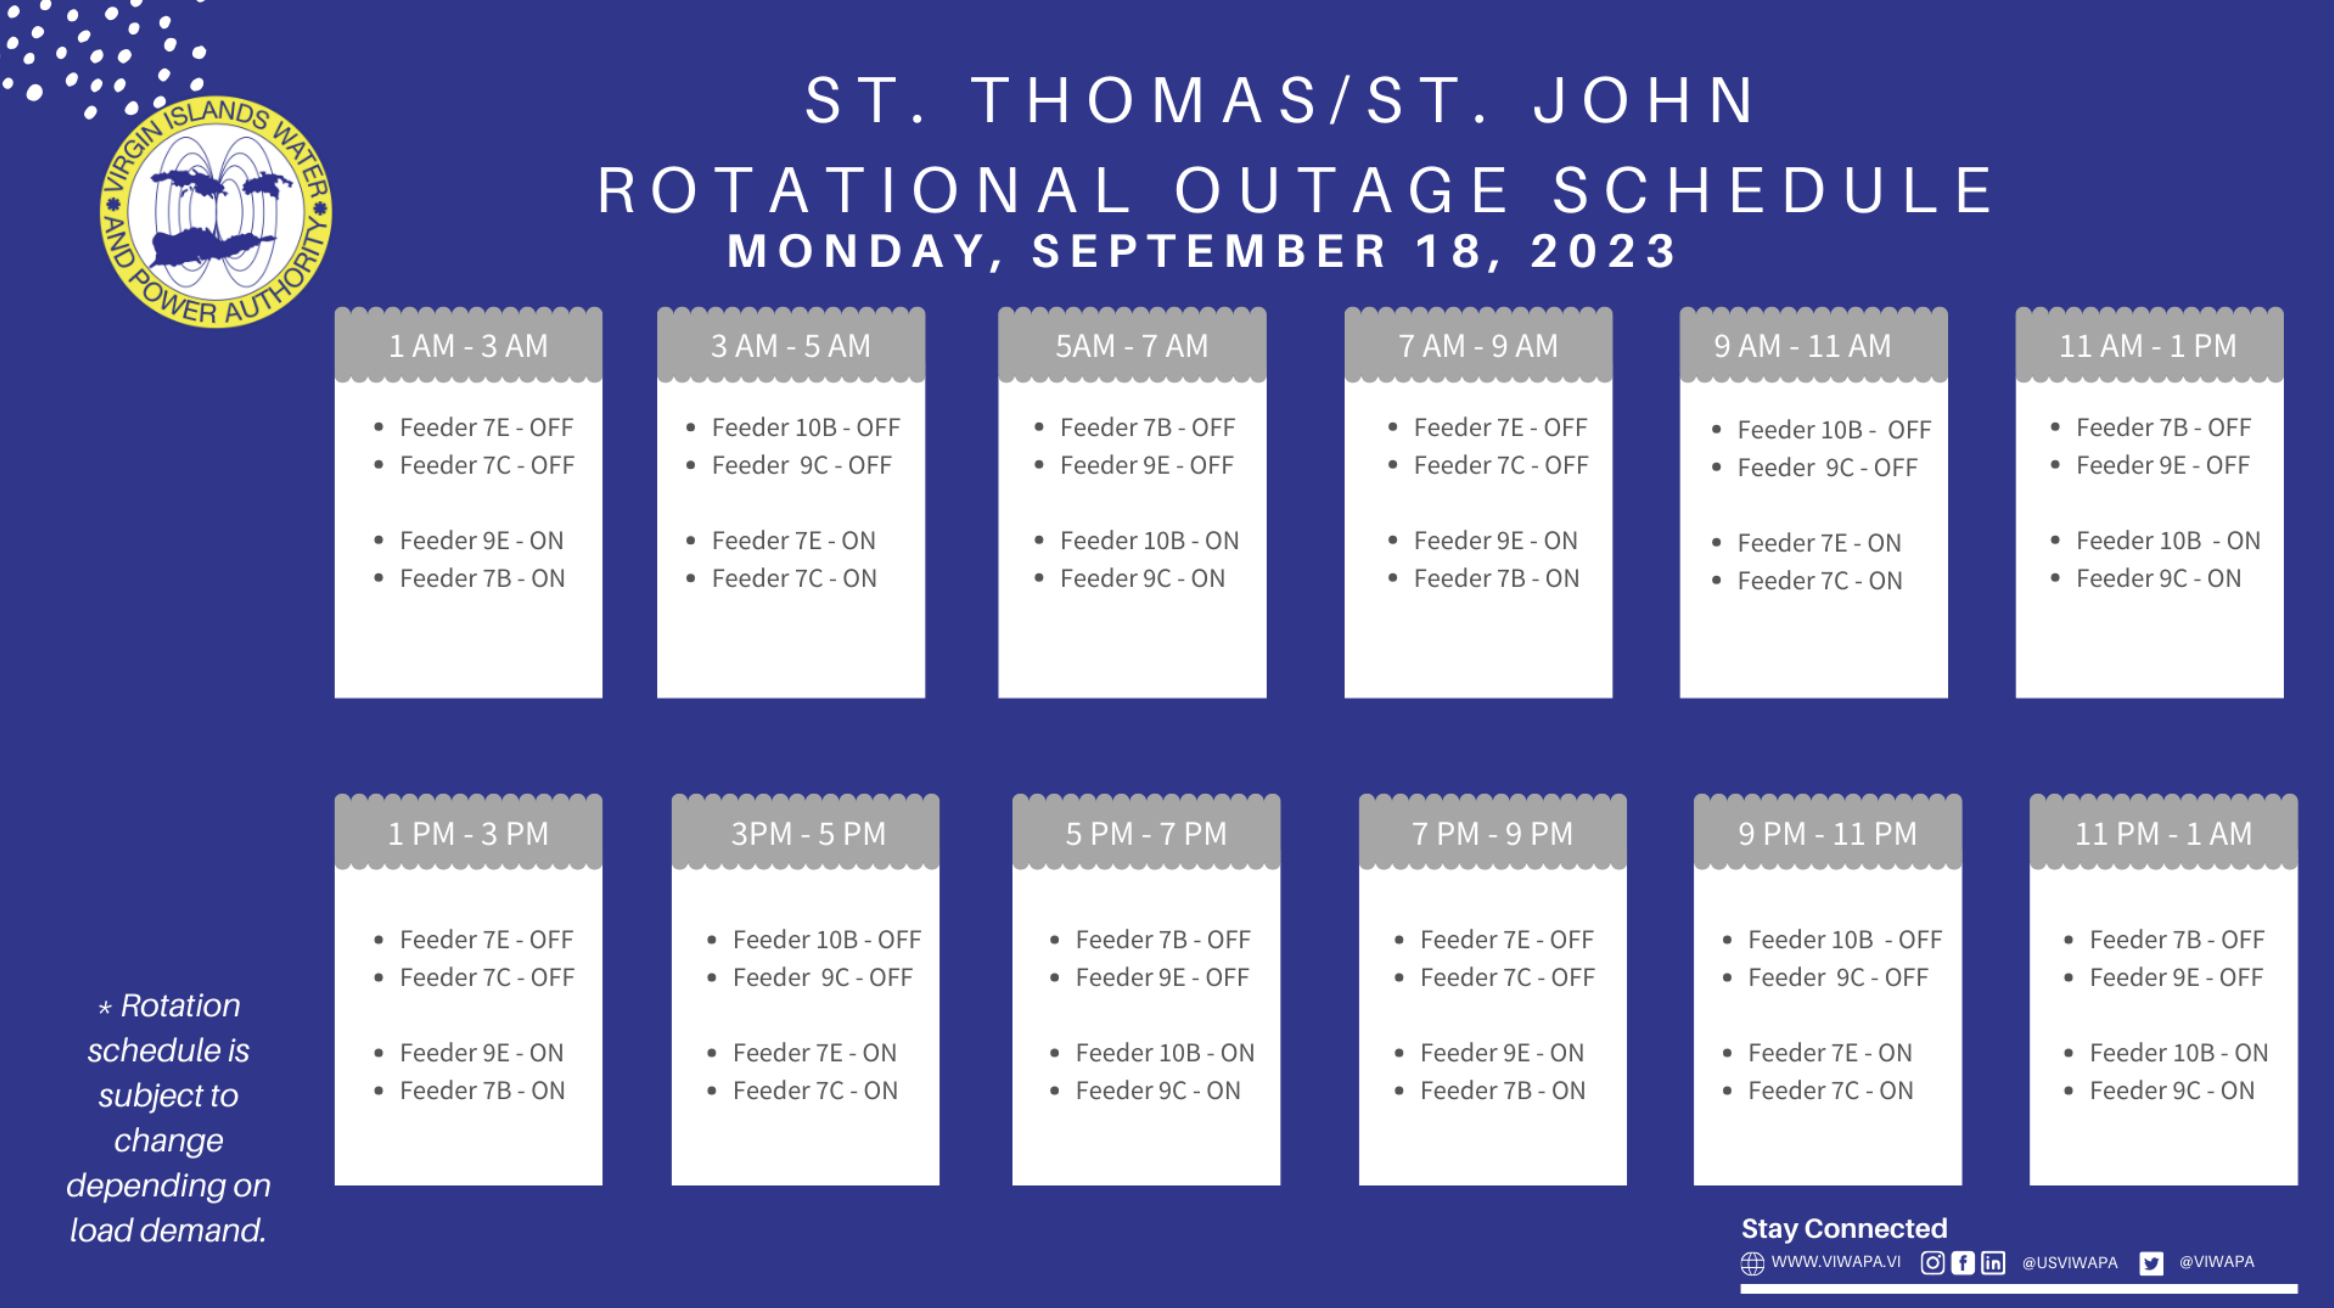 Rotation schedule for the St. Thomas/St. John district on Monday, which is subject to change. (Graphic courtesy WAPA)